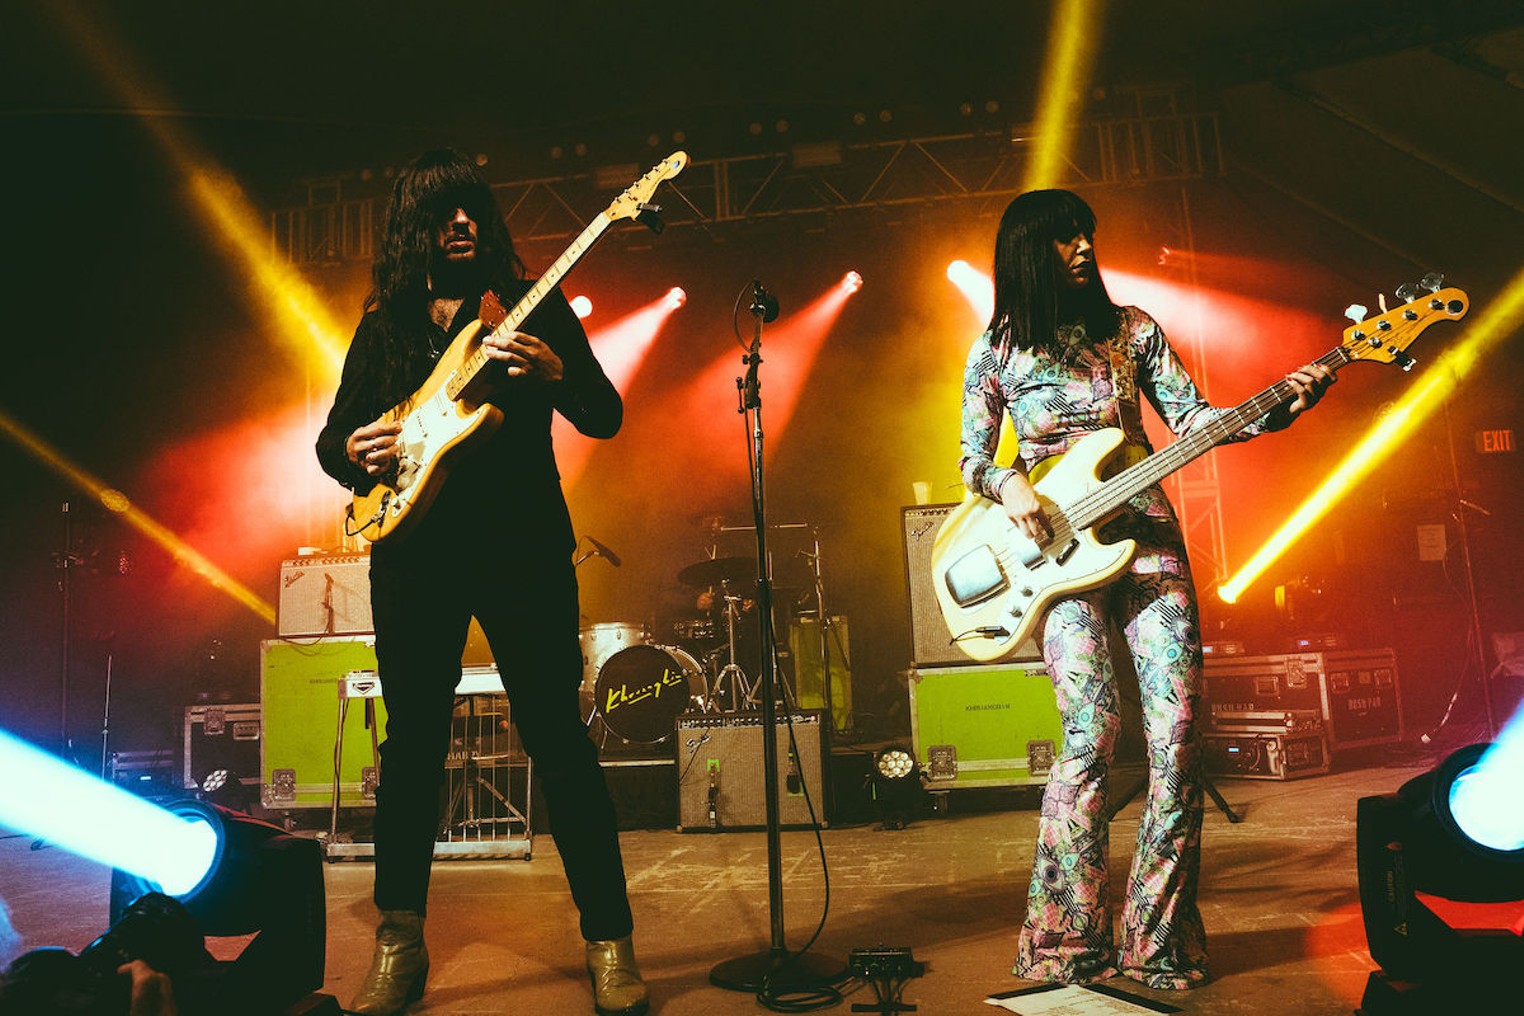 Interview with Laura Lee Khruangbin on the 2022 North American Tour